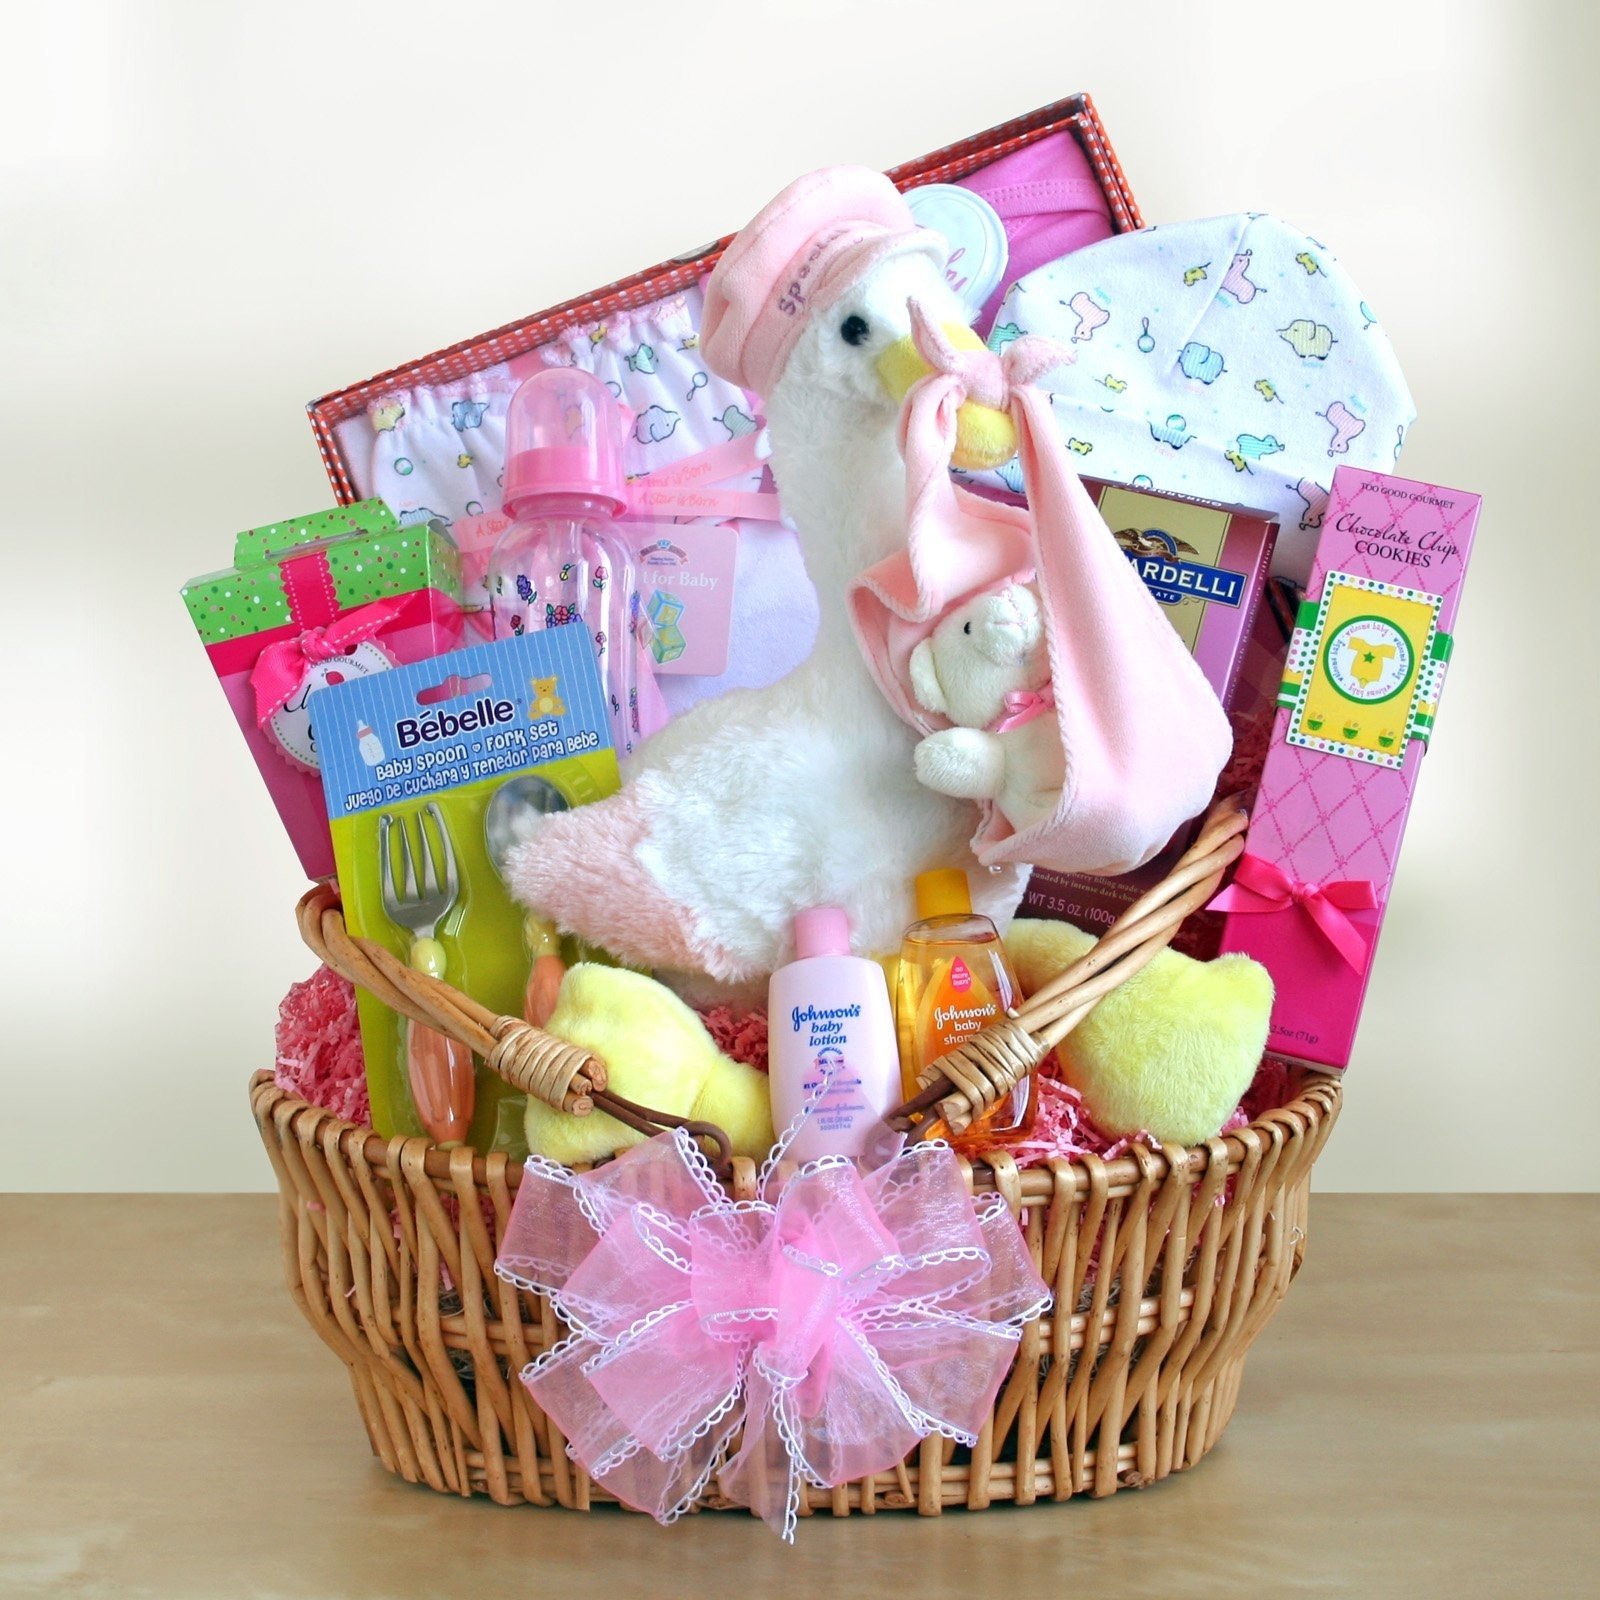 10 Unique Gift Ideas For New Baby photo baby gift baskets baby image 2022